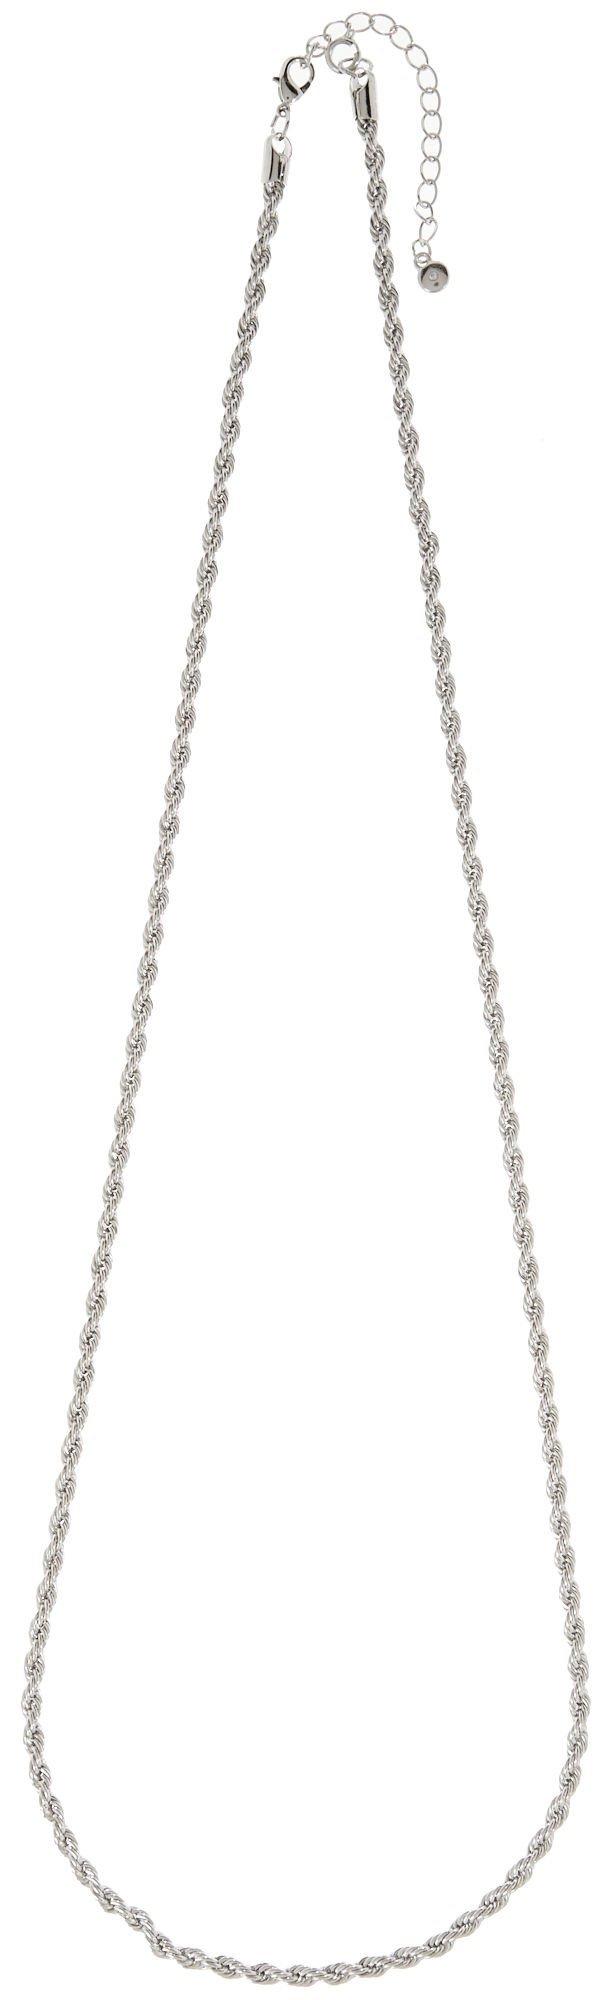 By Roman Silver Tone Rope Chain Necklace